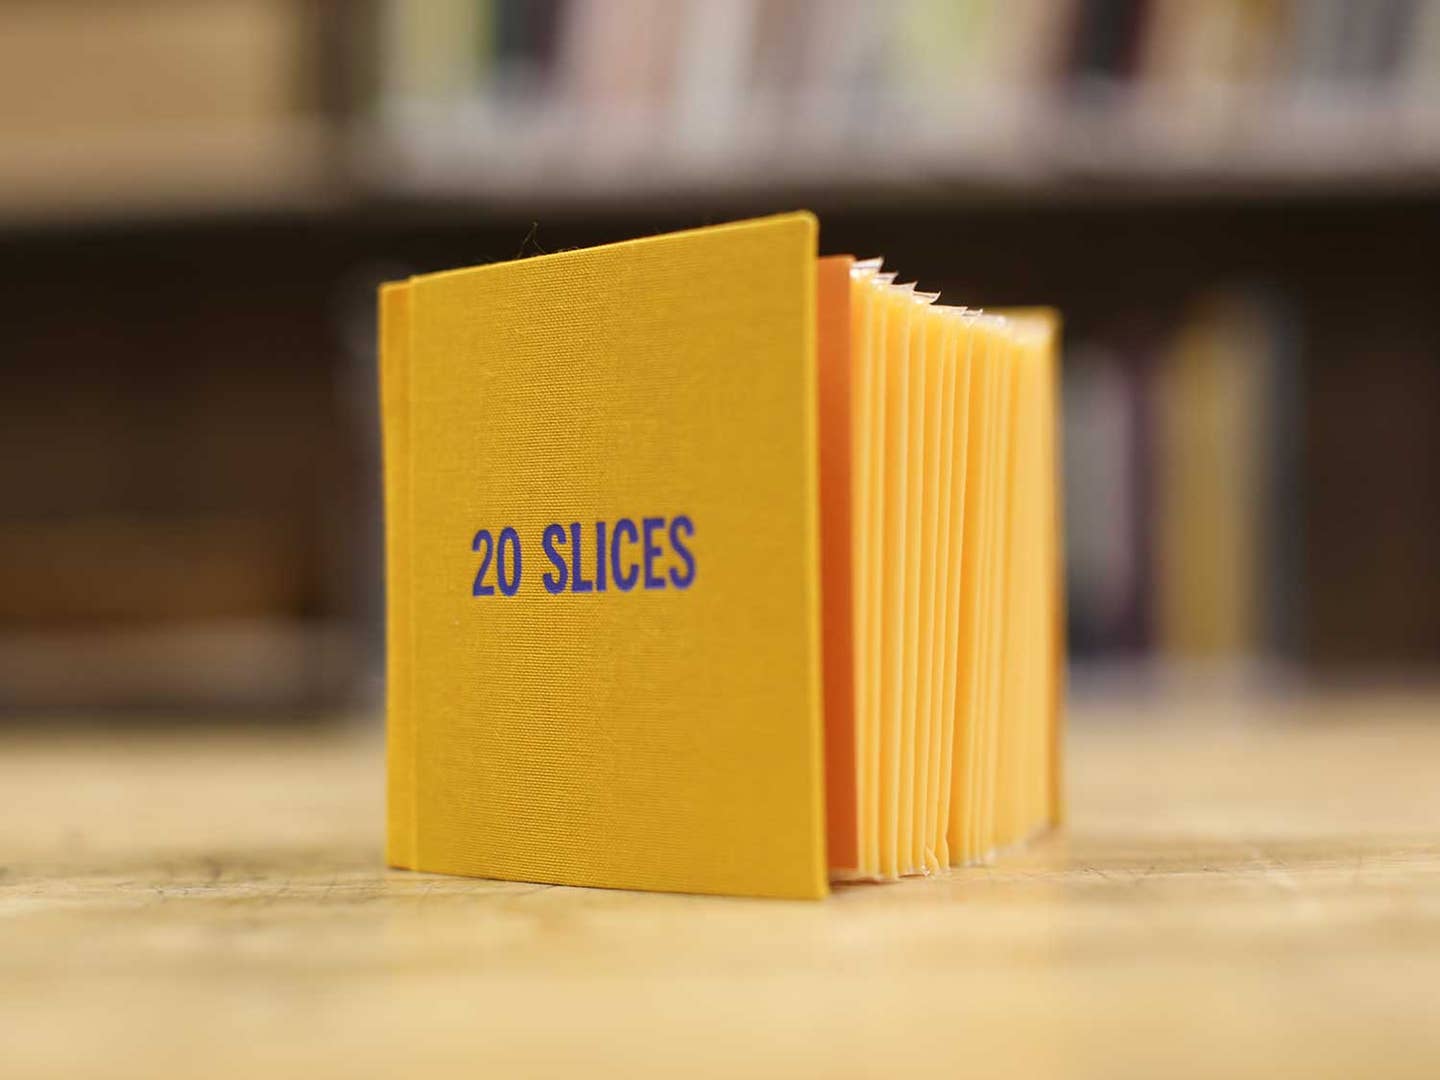 You Can Check Out an Actual Cheese Book at this Michigan Library